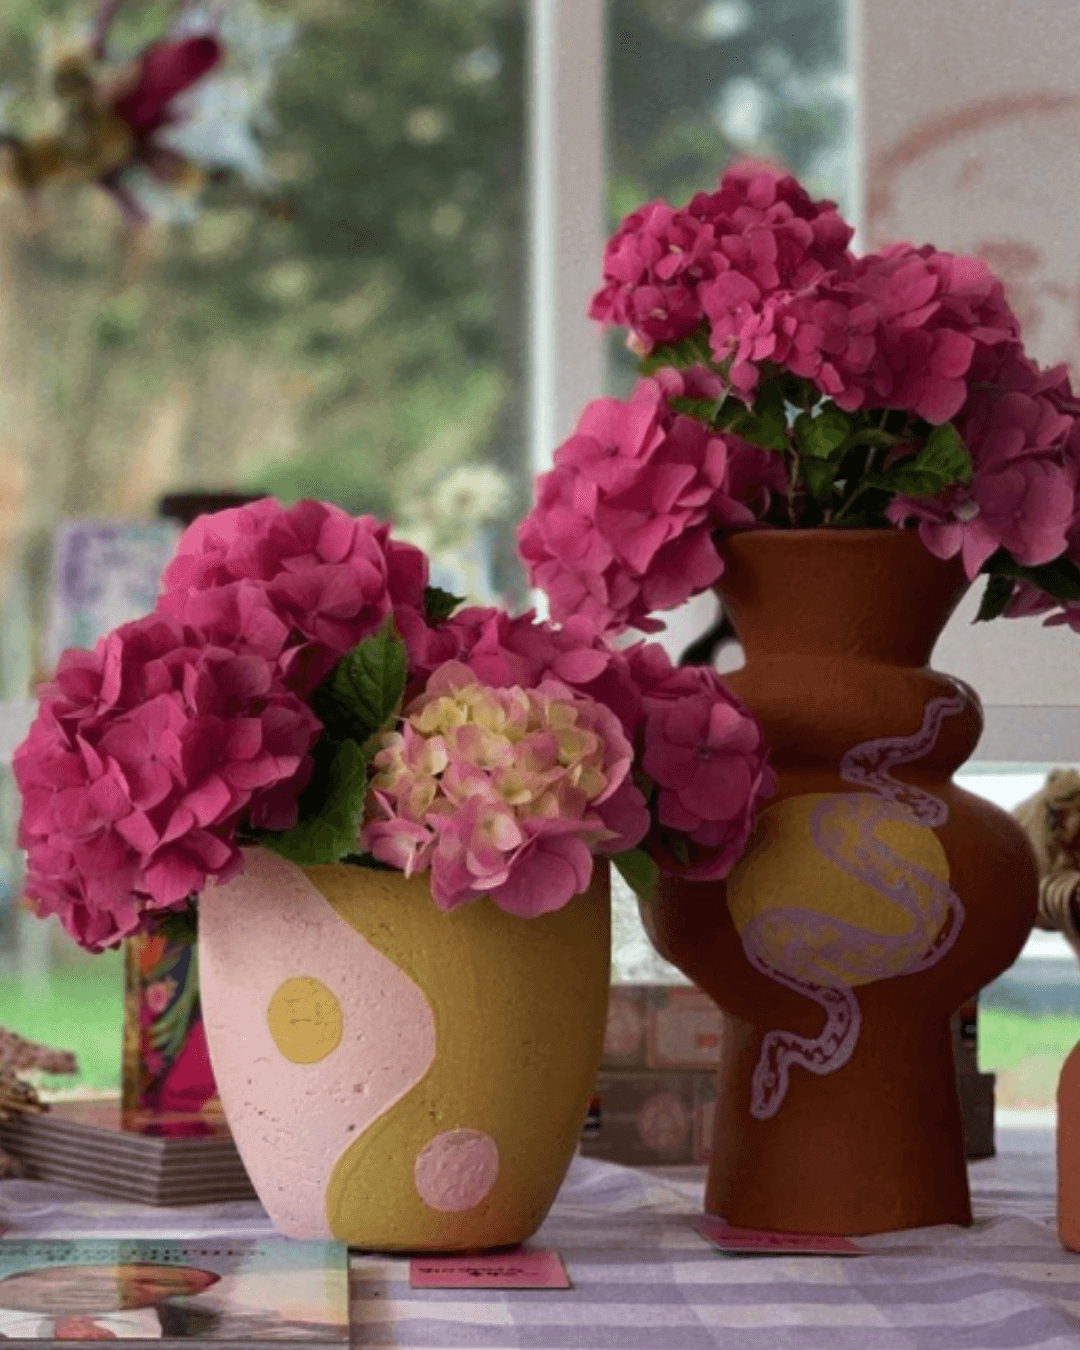 handmade vases of colourful pink flowers